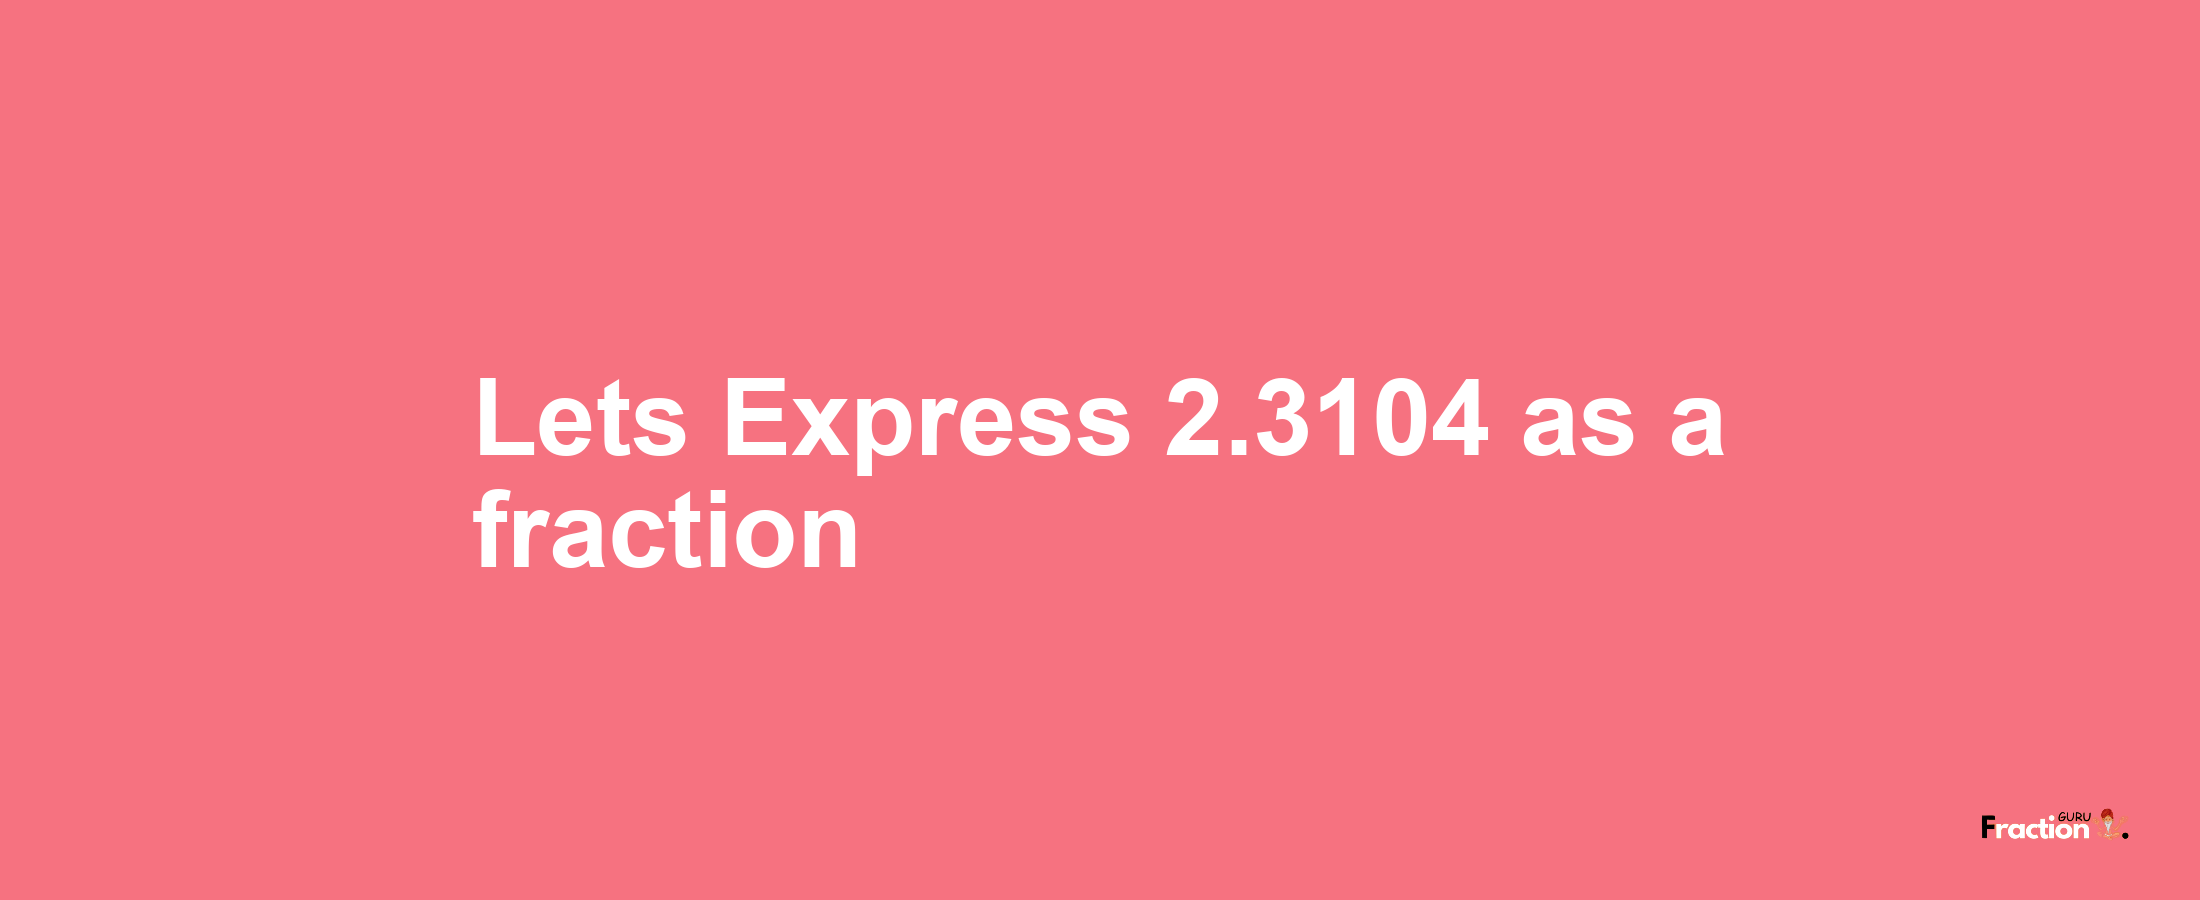 Lets Express 2.3104 as afraction